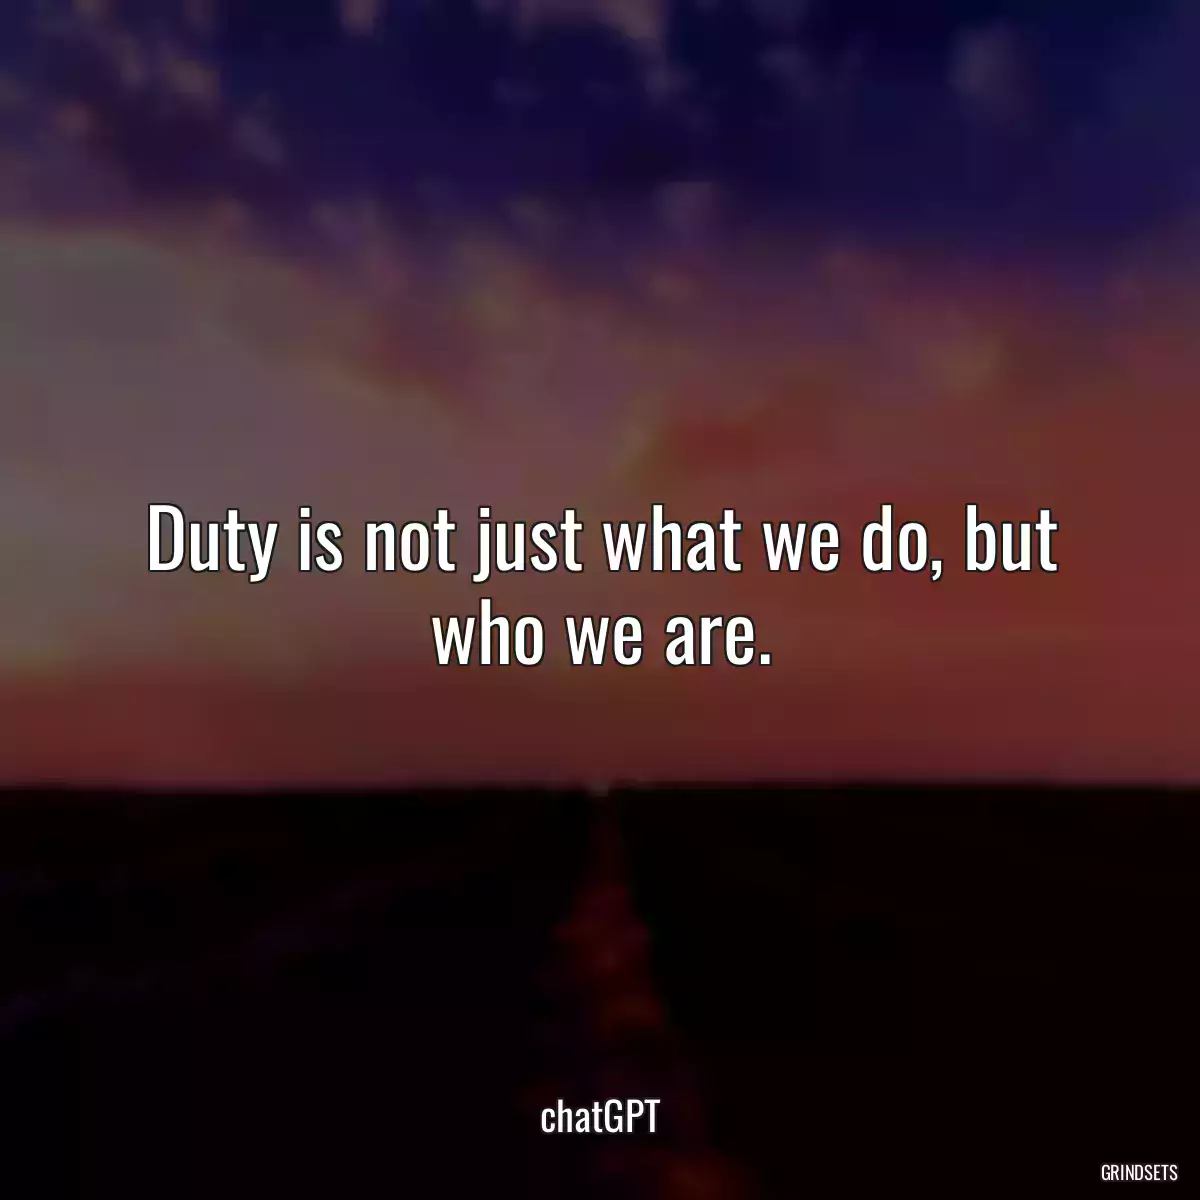 Duty is not just what we do, but who we are.